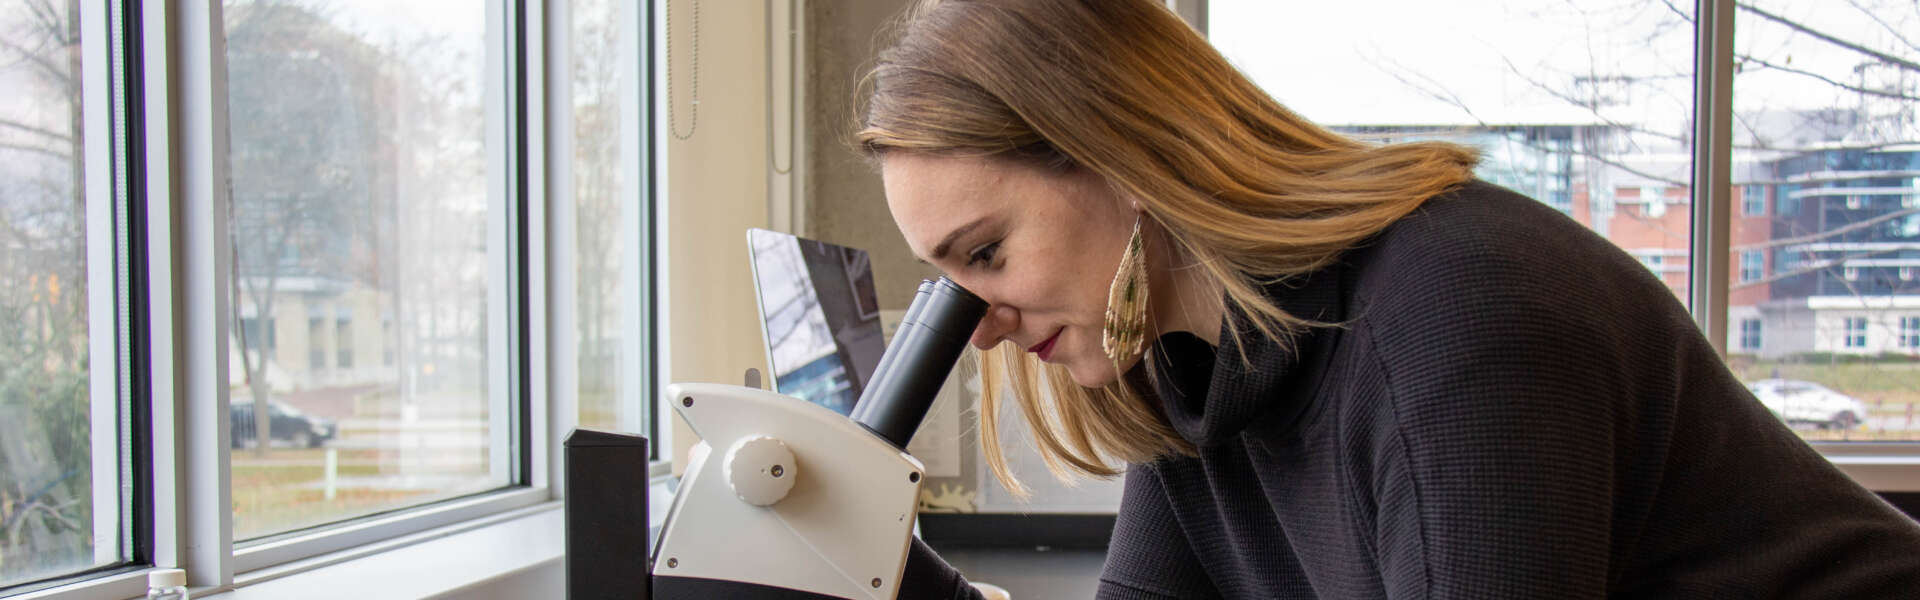 Danielle Nowosad in black sweater leans to peer into a microscope in front of a window.